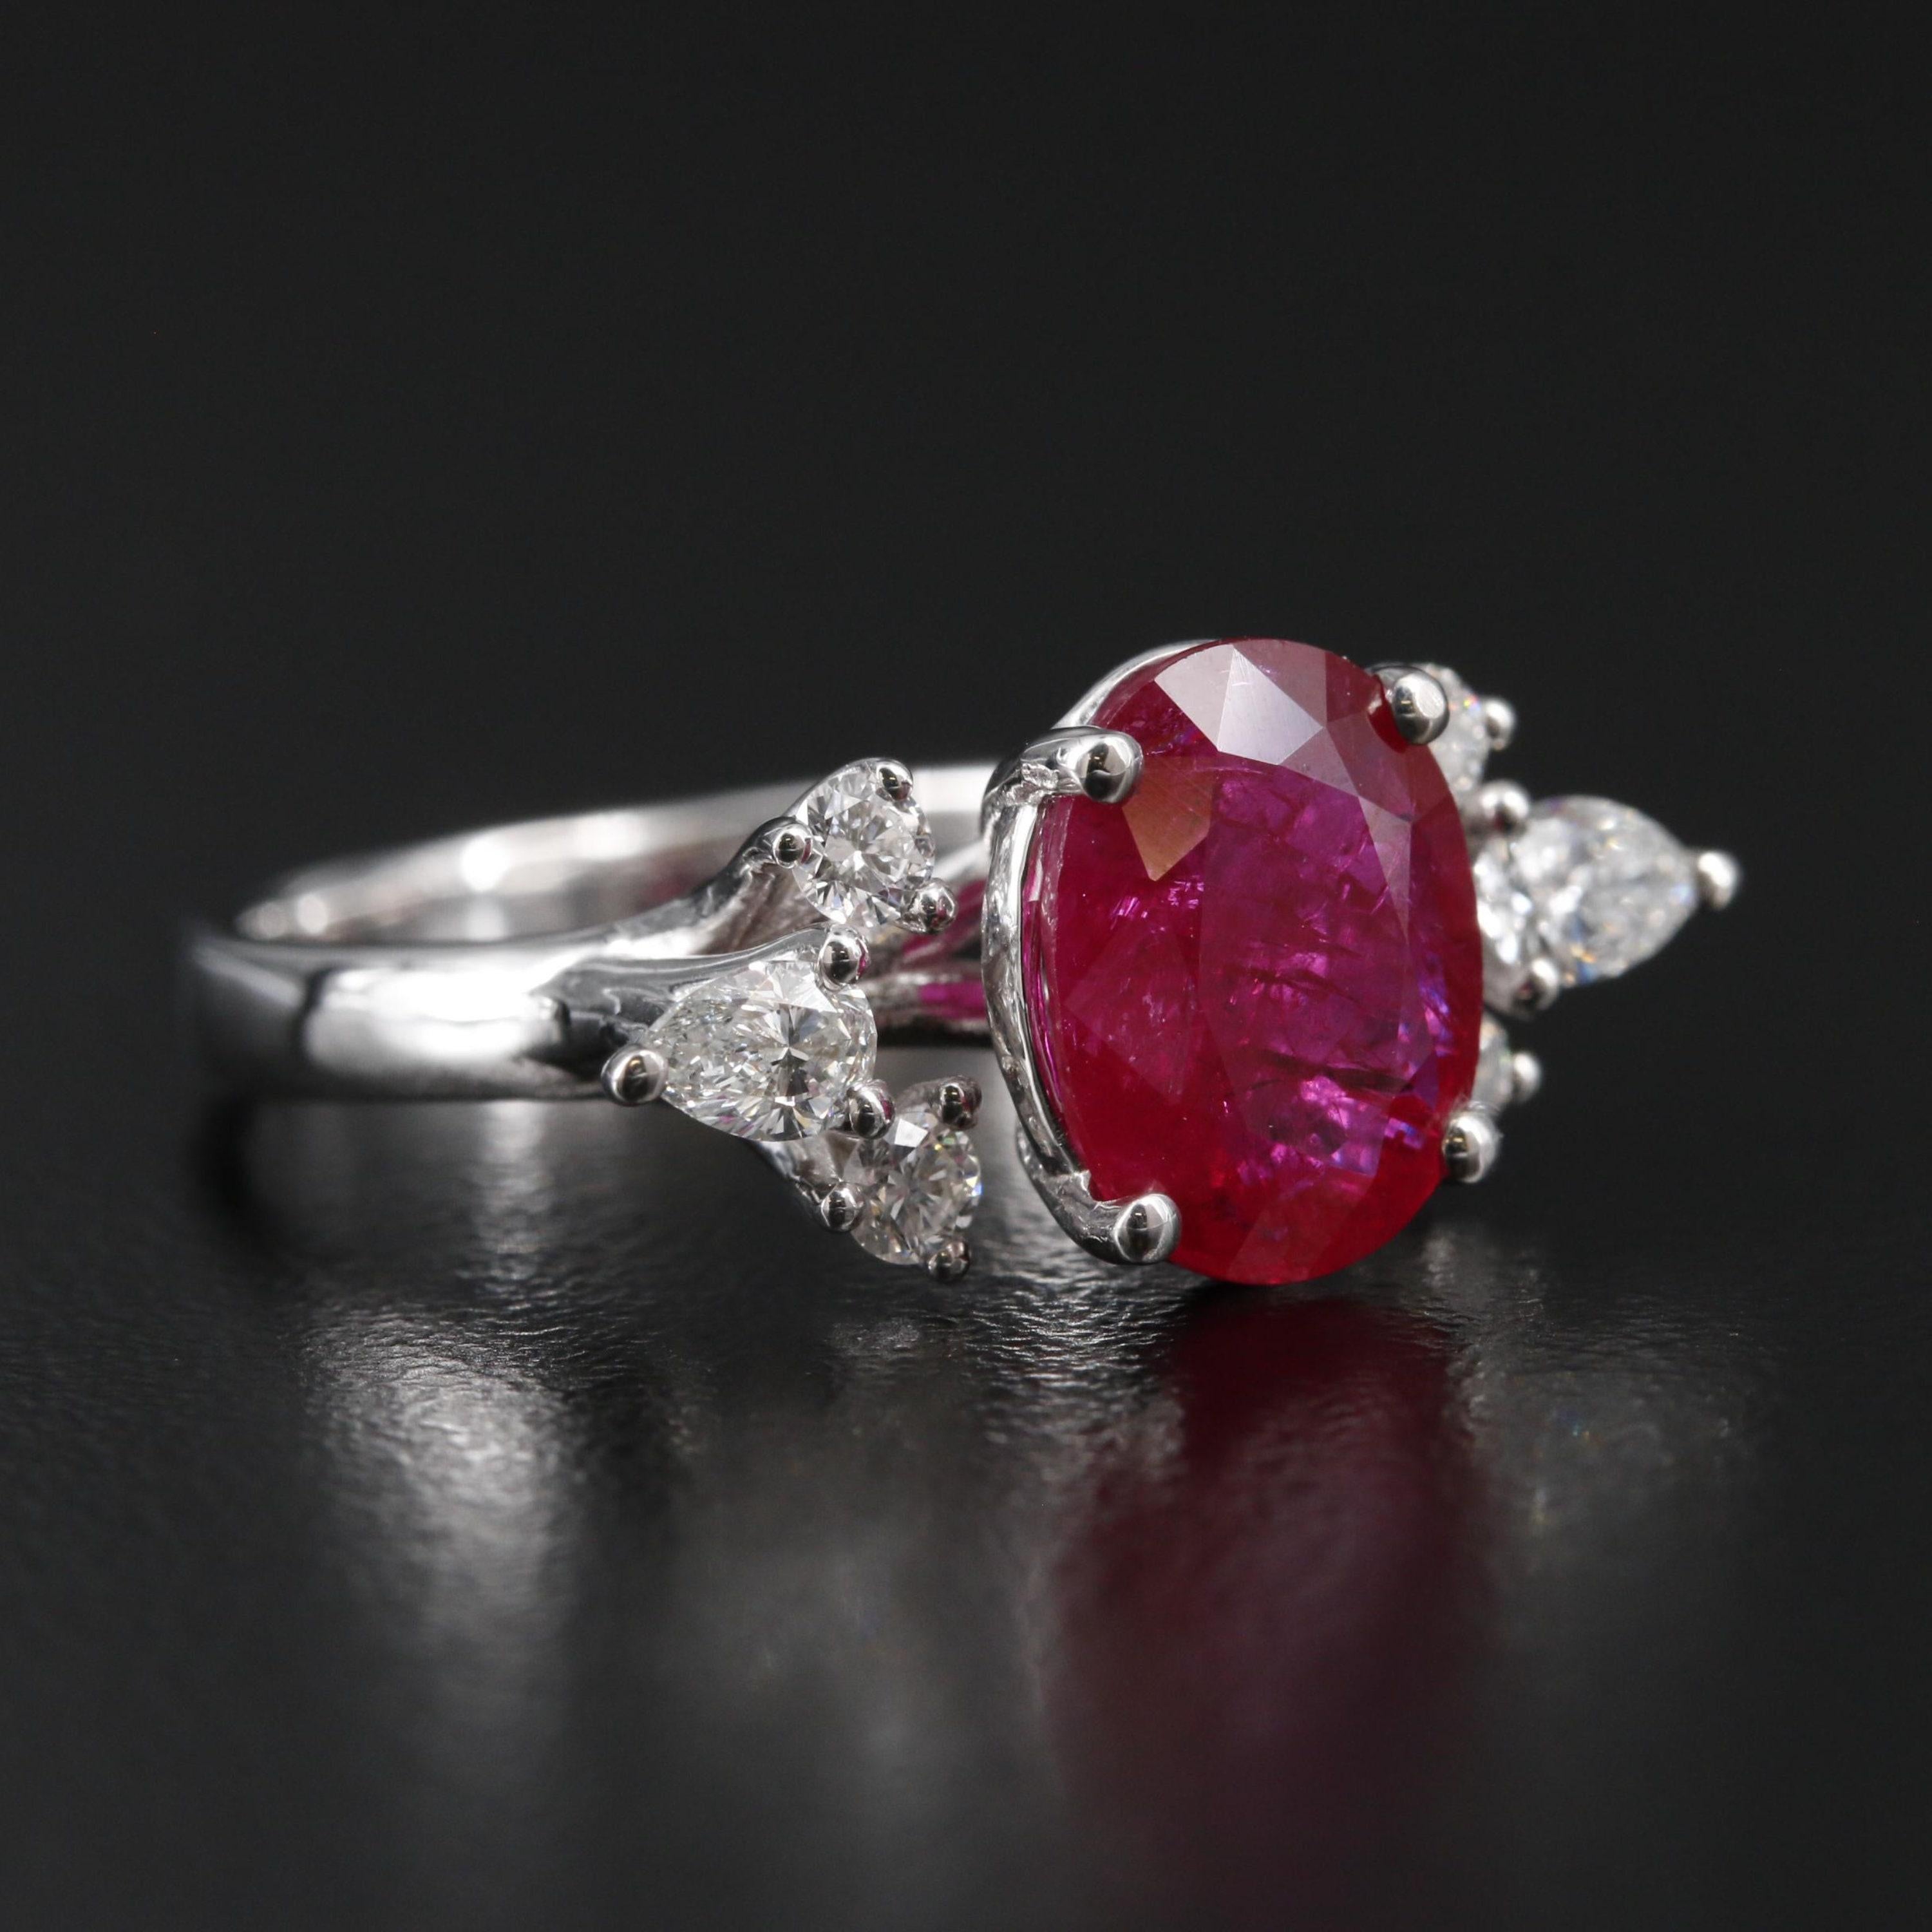 For Sale:  2 Carat Oval Cut Ruby Engagement Ring Antique Victorian Ruby Ruby Wedding Ring 5